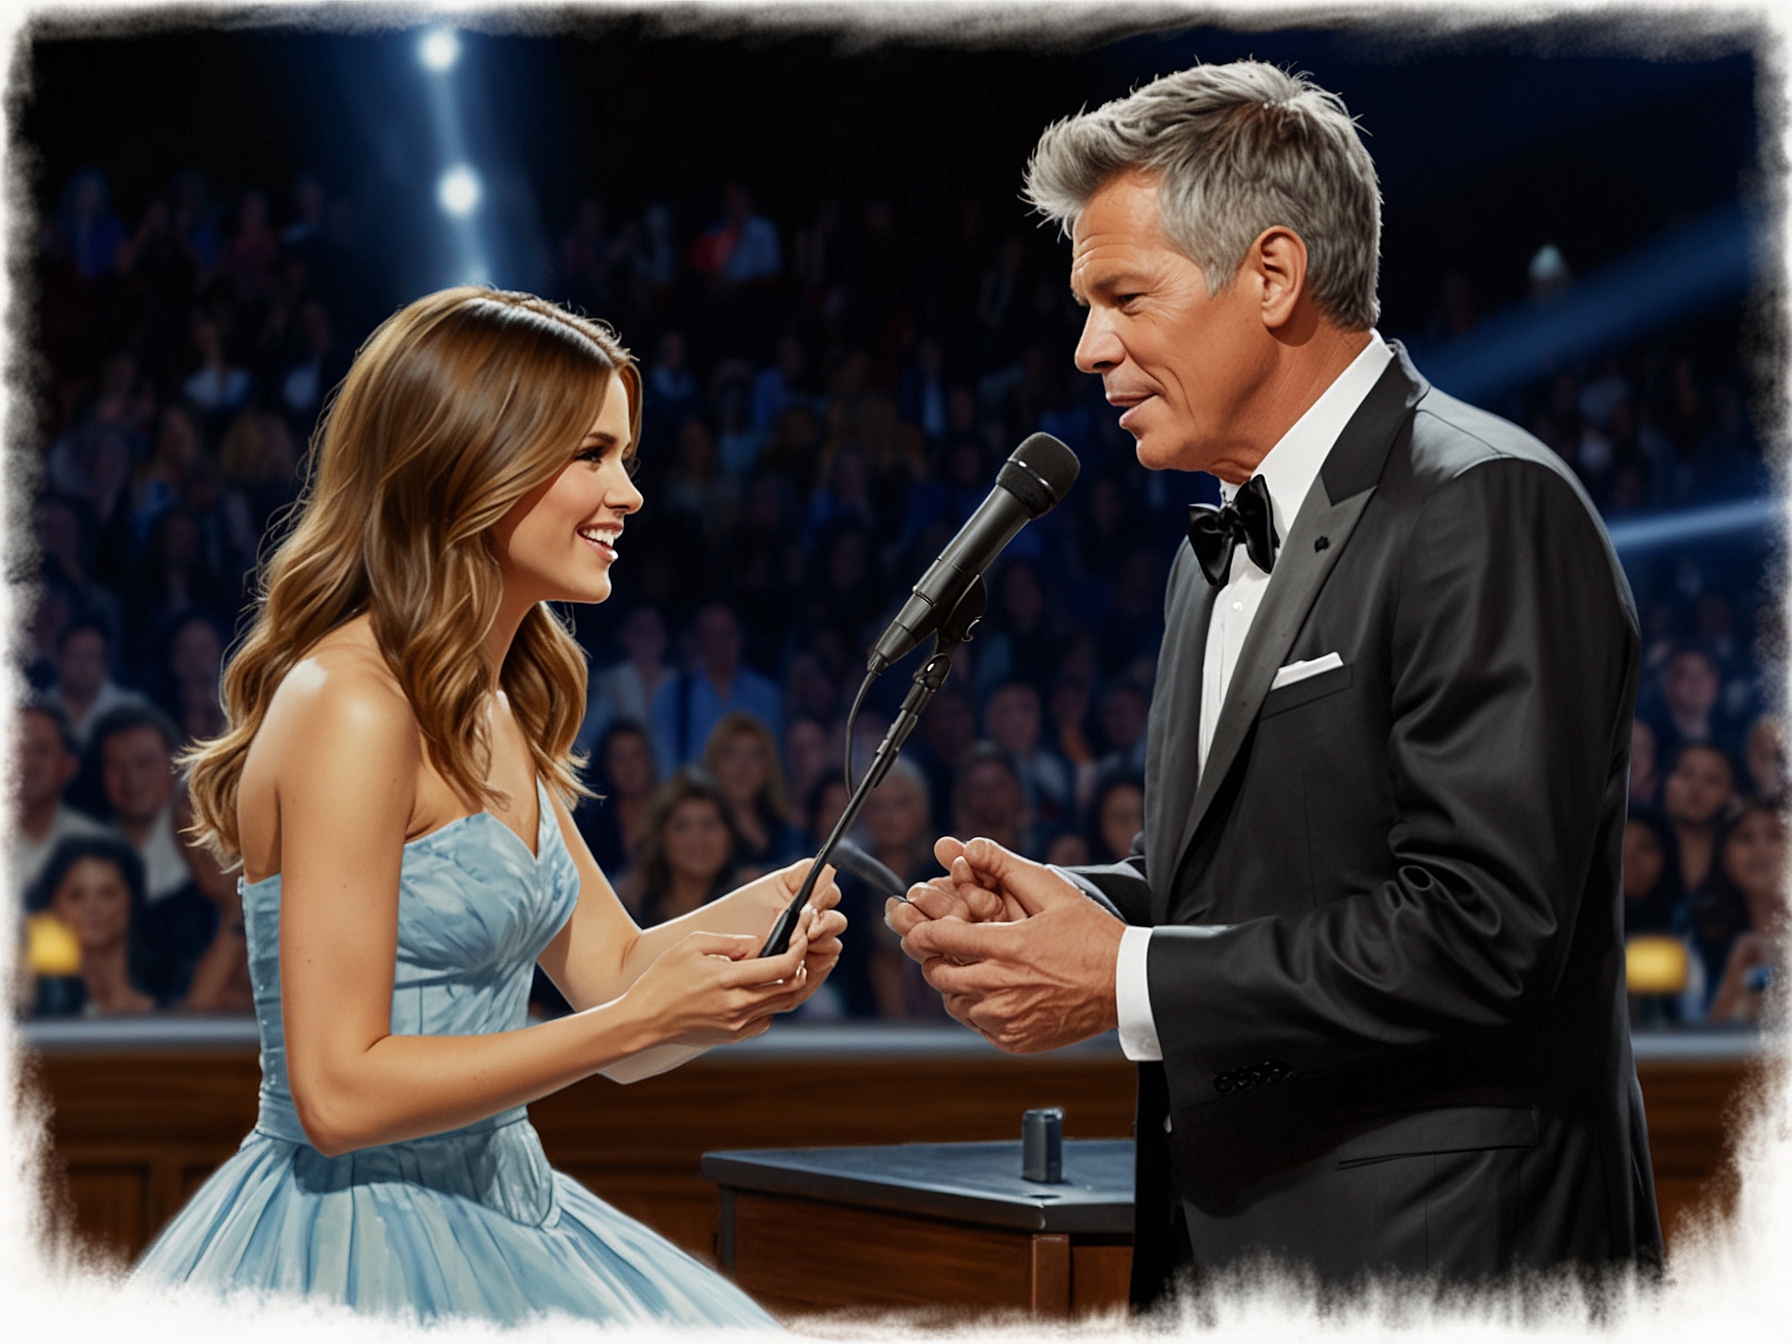 David Foster can be seen mentoring a young Katherine McPhee on the American Idol stage, during a pivotal moment where the controversial comment was made, sparking recent outrage.